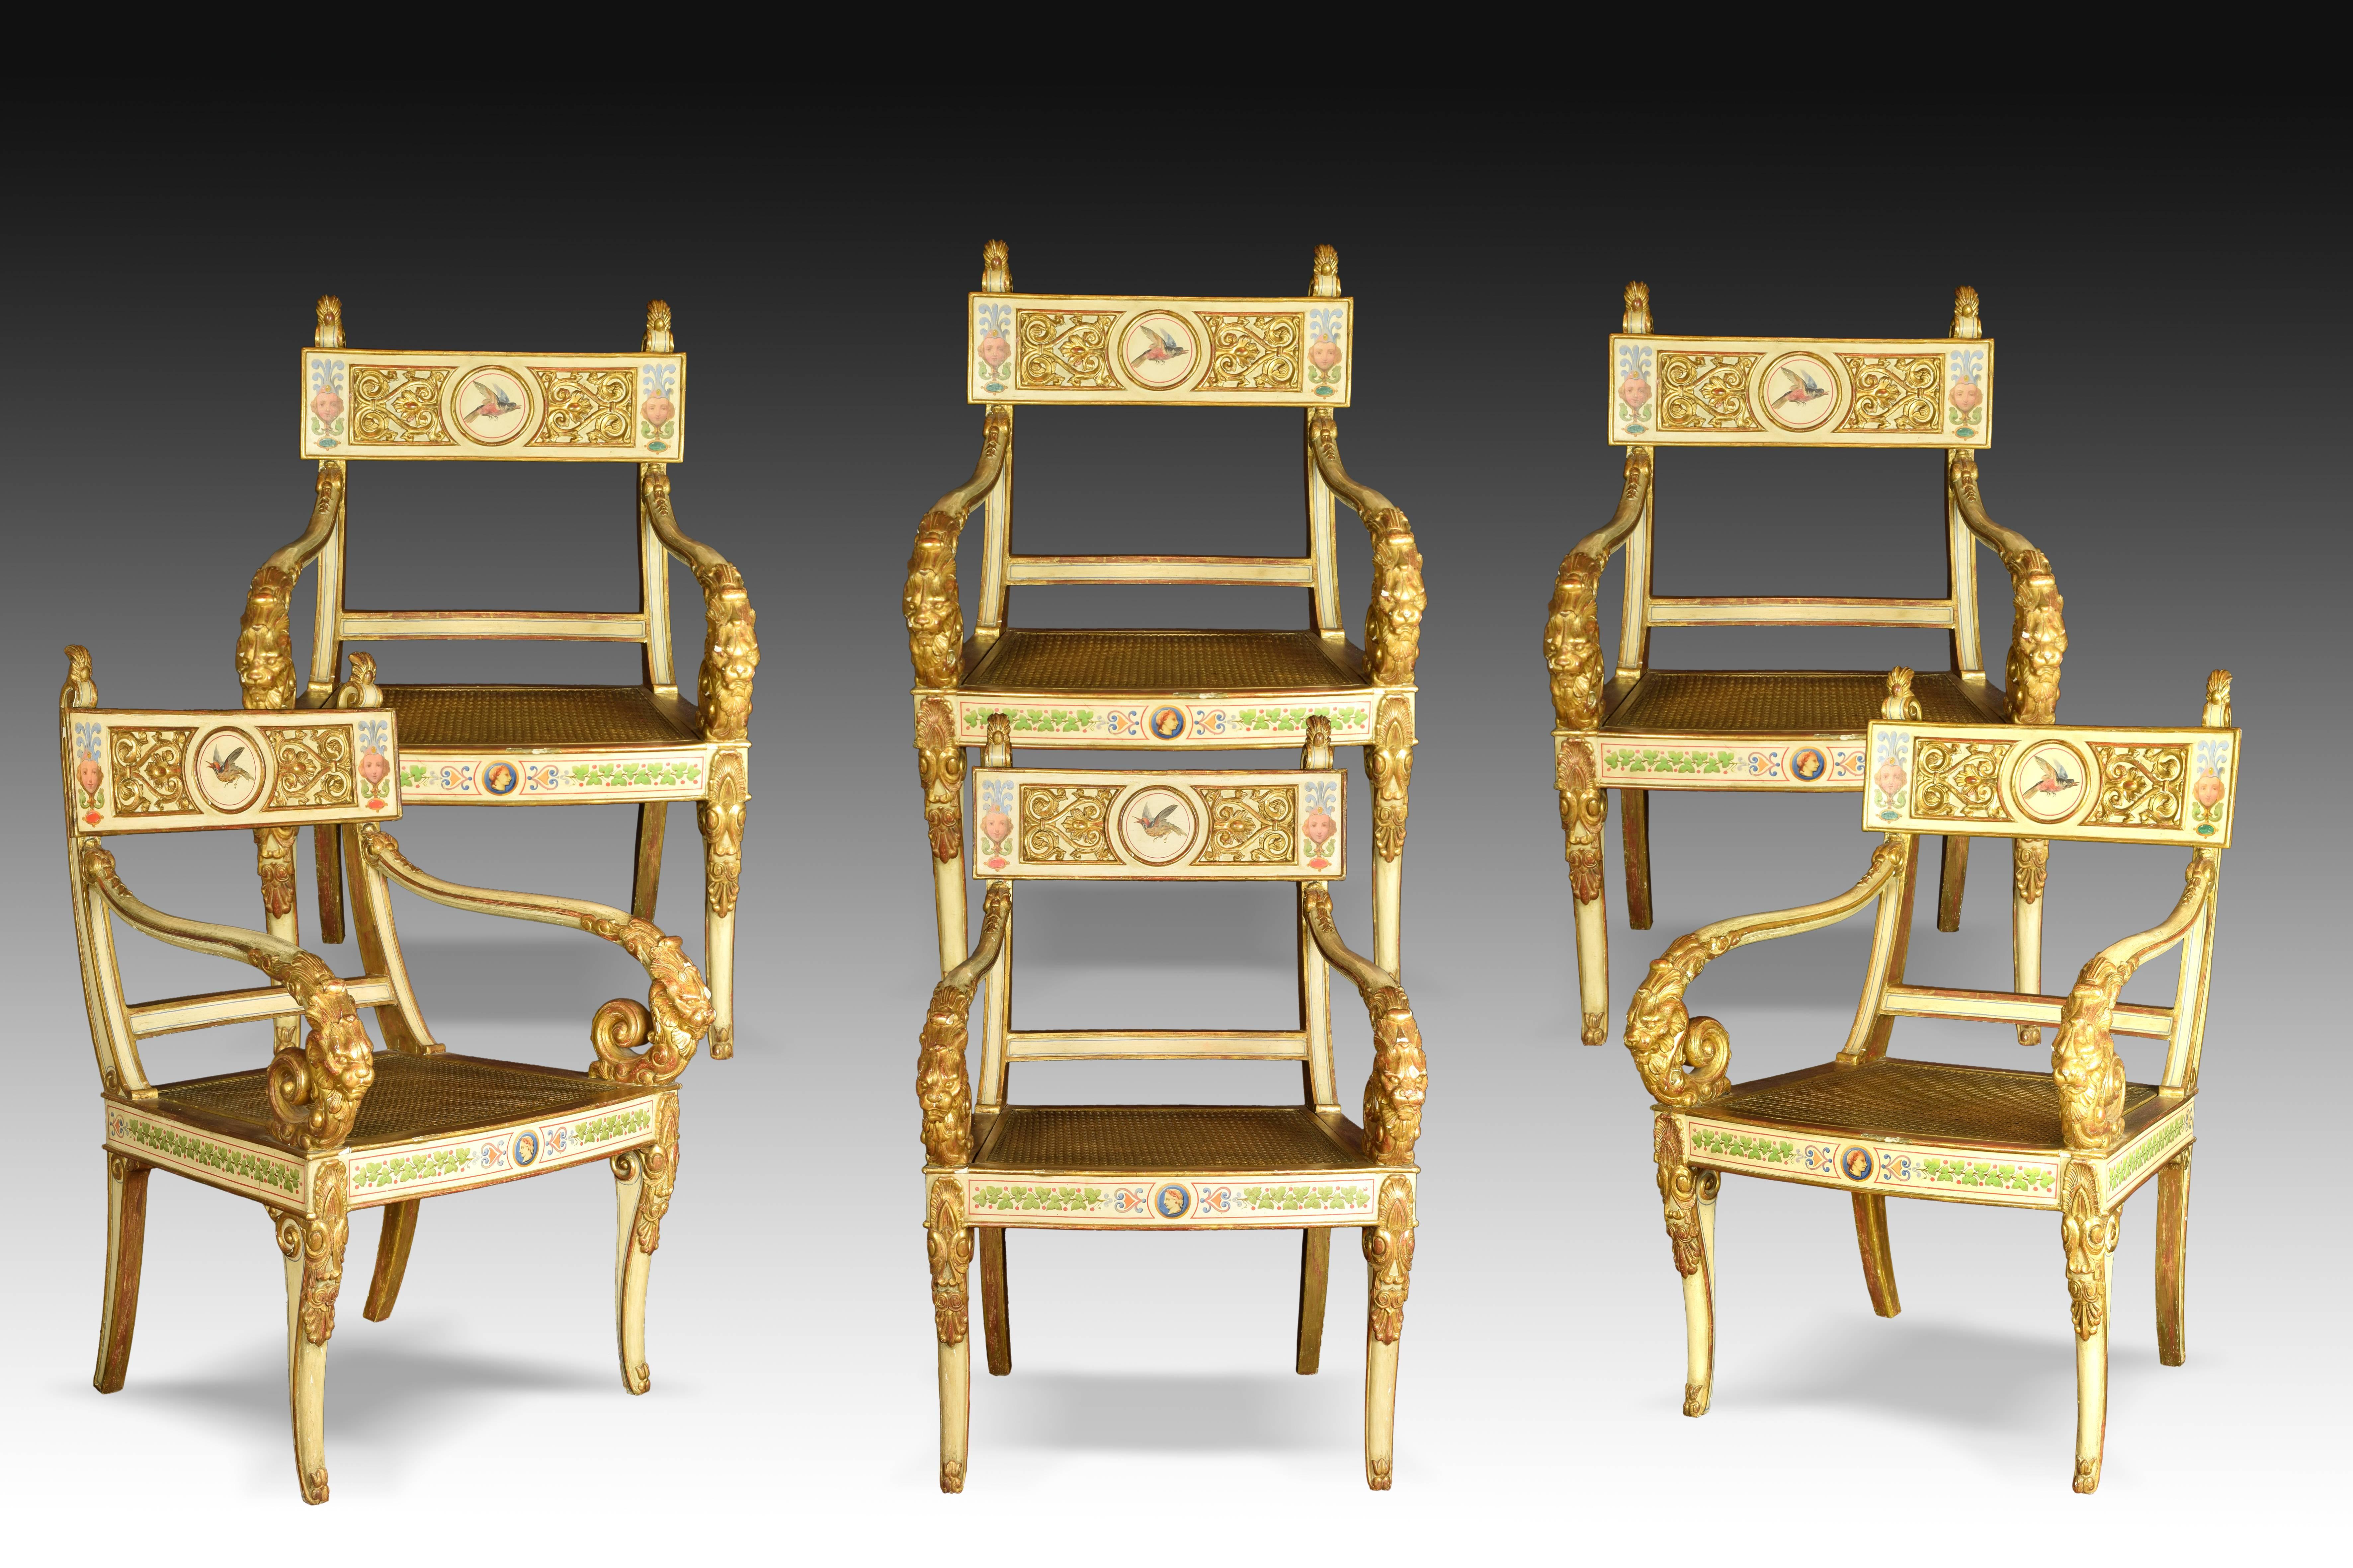 Neoclassical Furniture Set, Wood Carved, Painted and Gilded, Possibly Spain, 19th Century